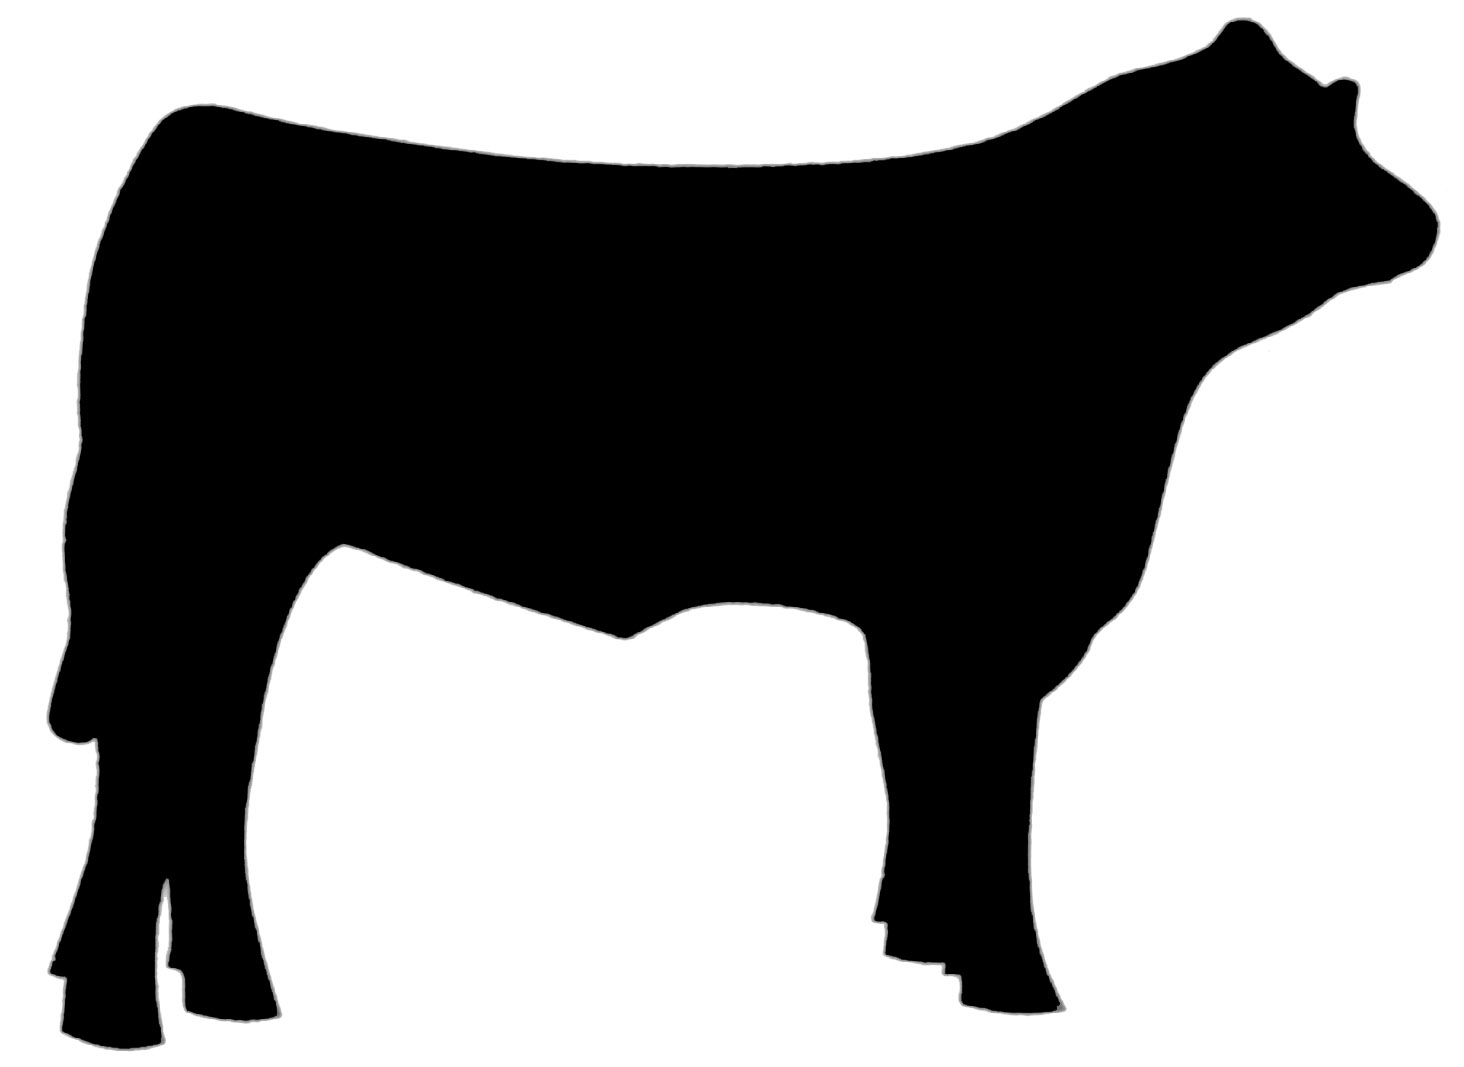 Cattle Drive Silhouette With Two Cowboys - ClipArt Best - ClipArt Best